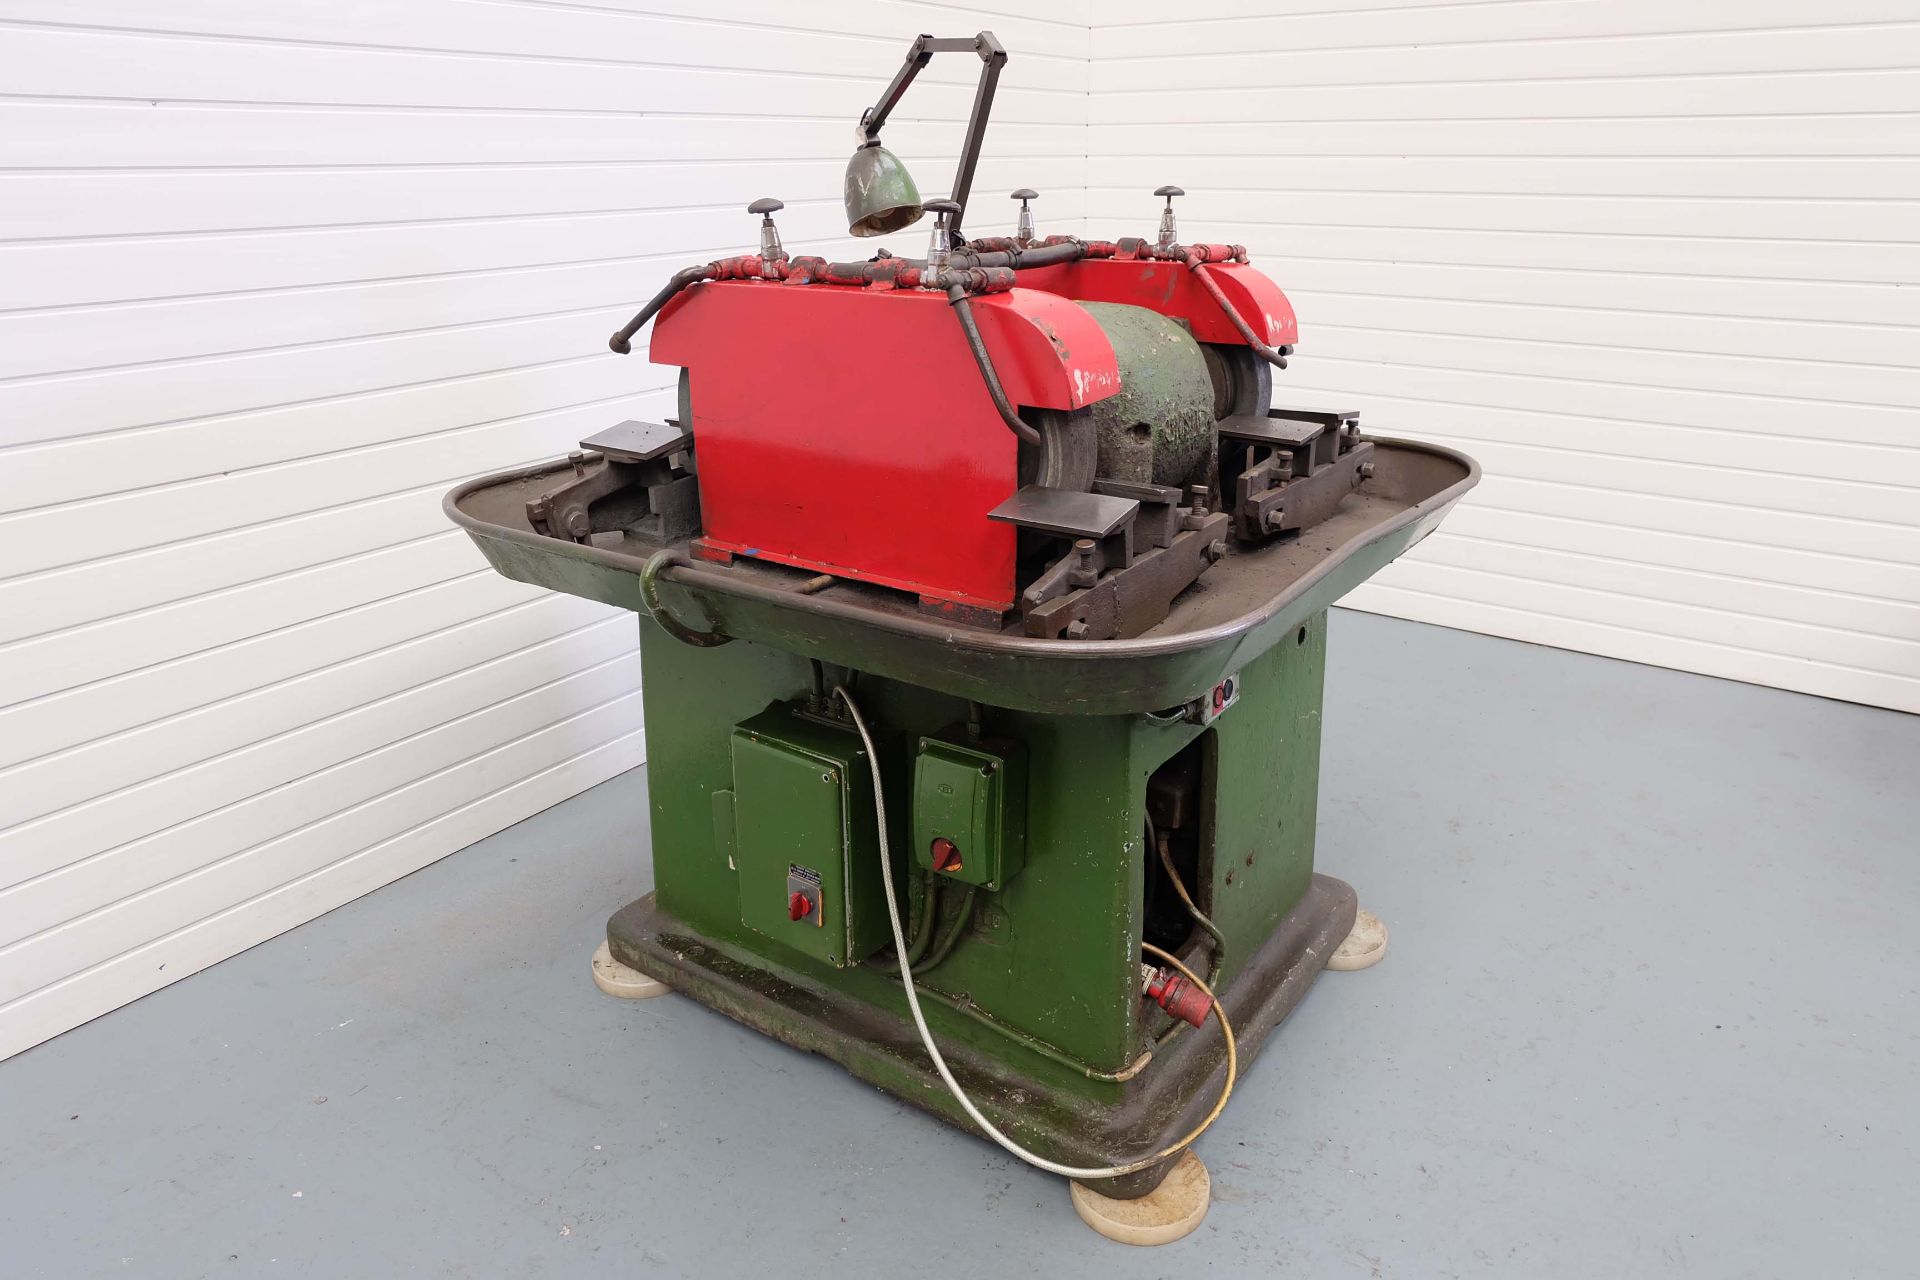 Lumsden Four Wheel Pedestal Grinder. Grinding Wheel Sizes: 14" x 3" Max. With Coolant Pump. - Image 11 of 11